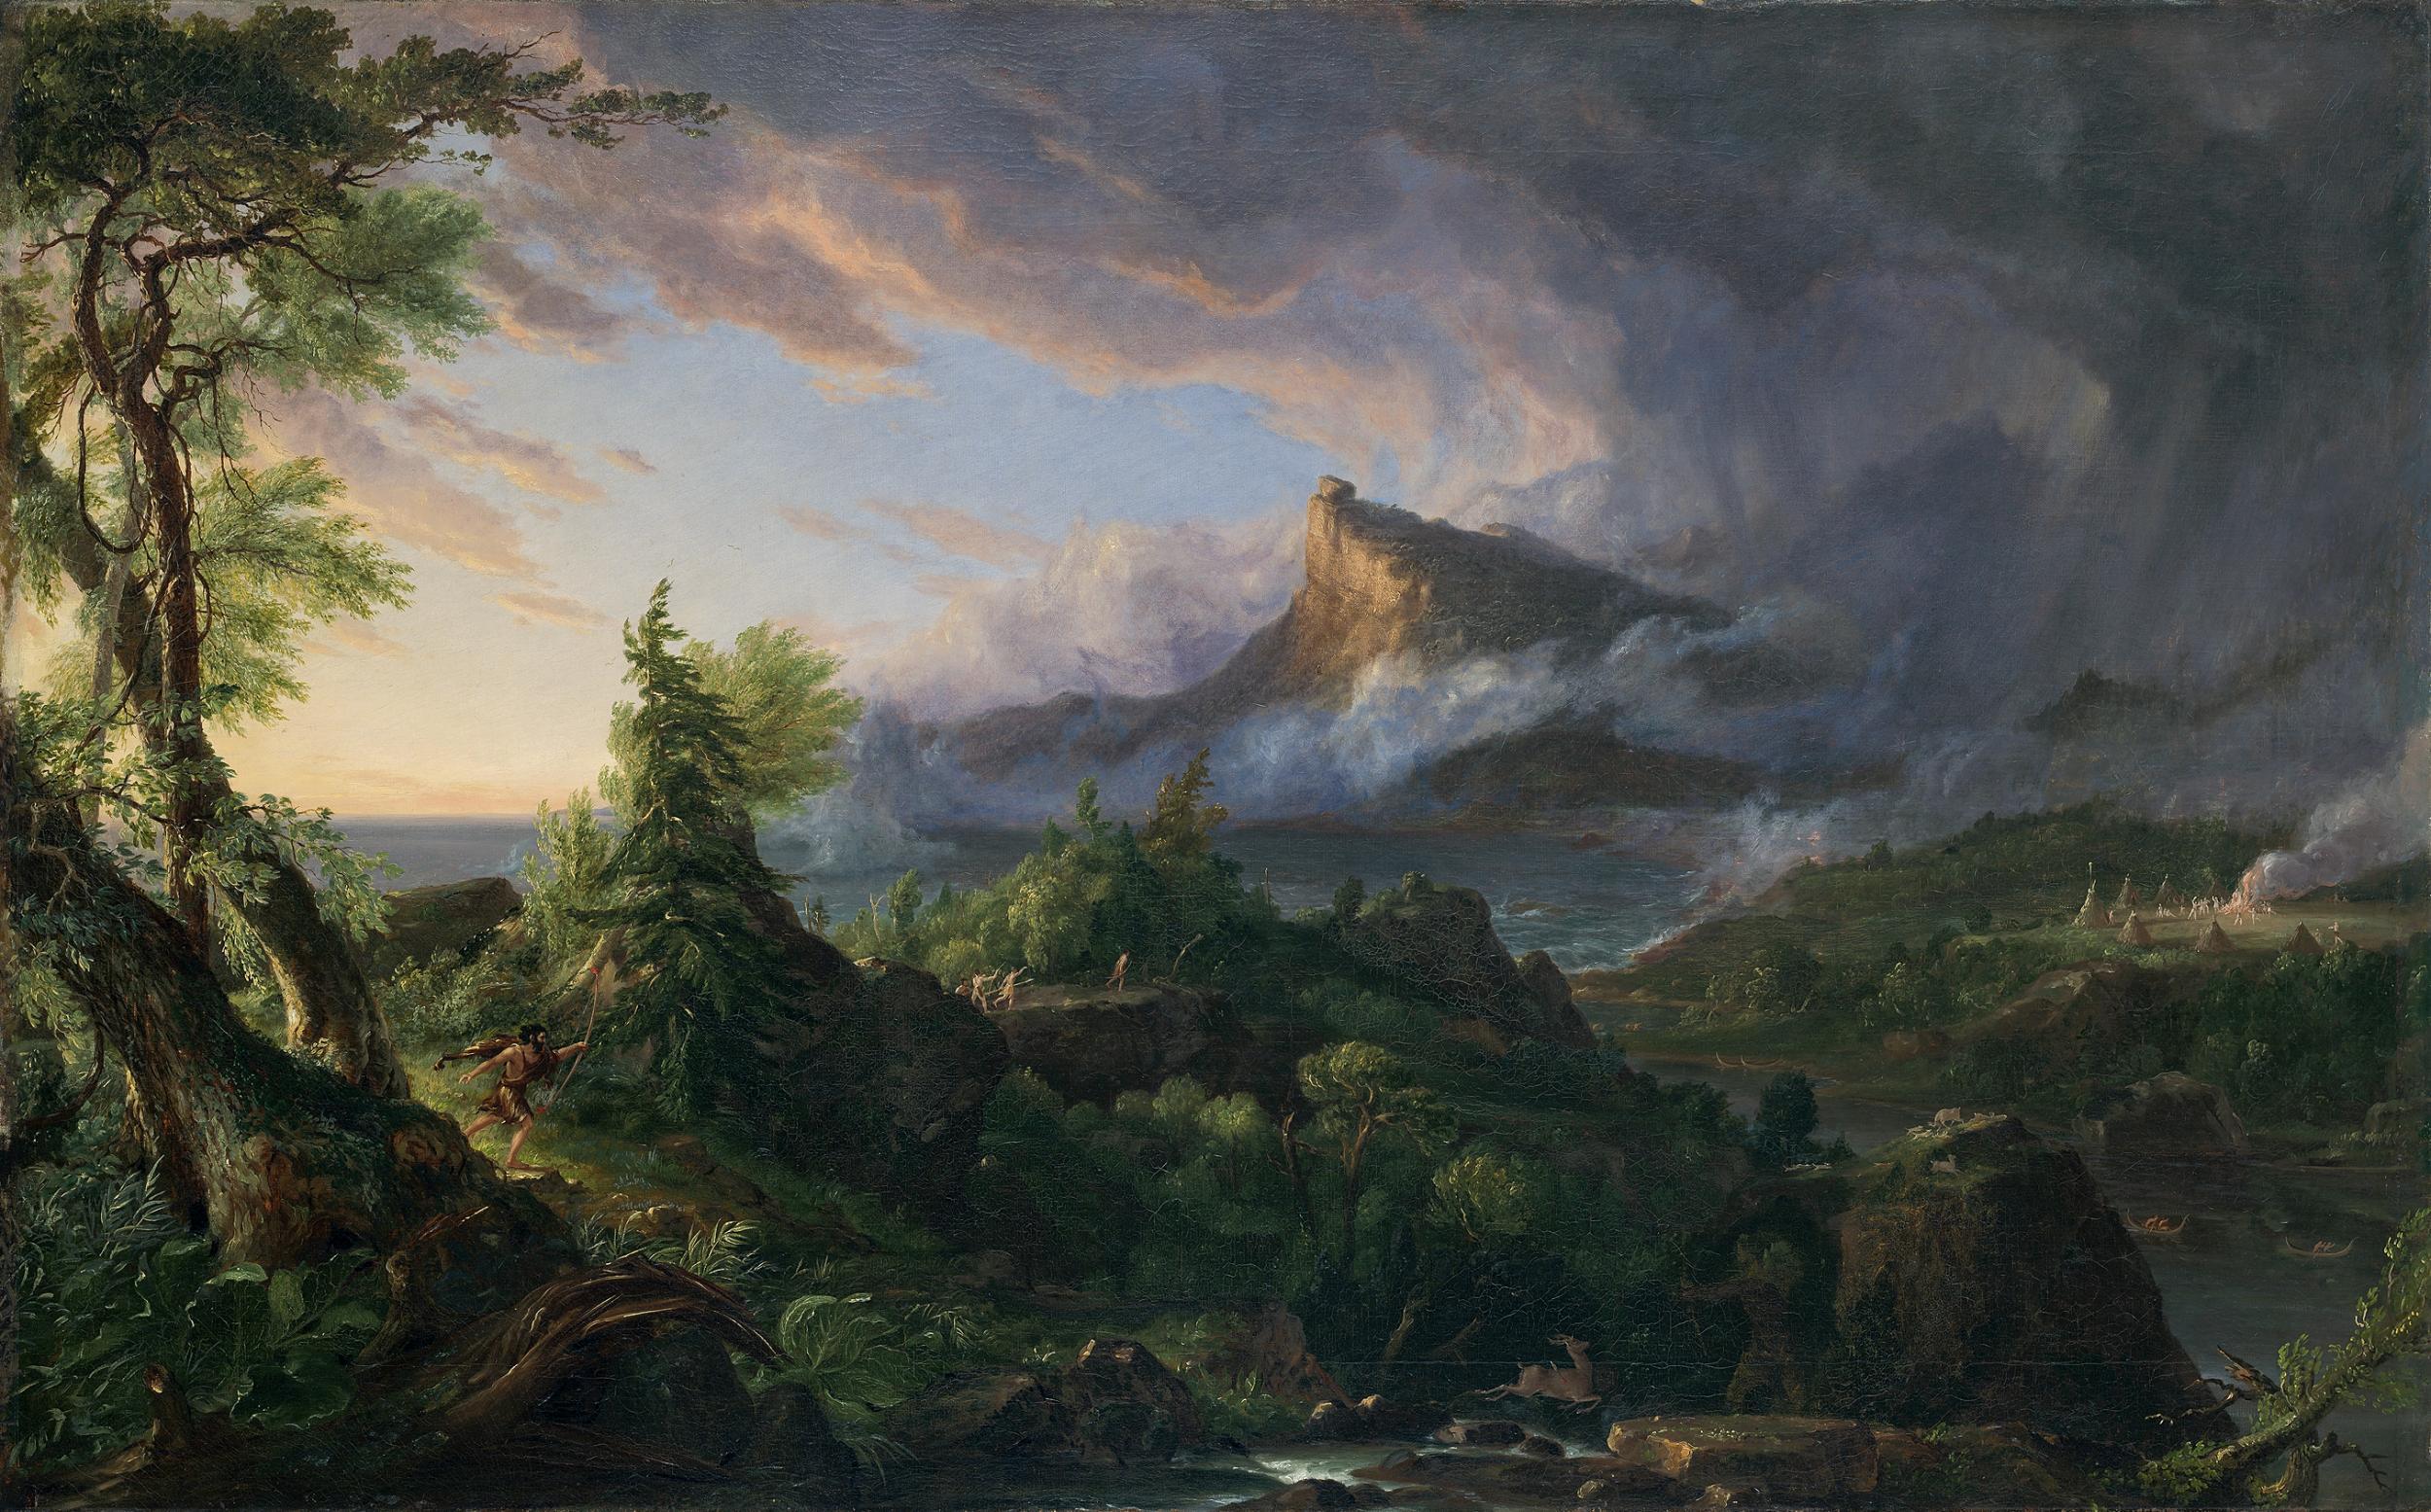 'The Course of Empire: The Savage State' by Thomas Cole